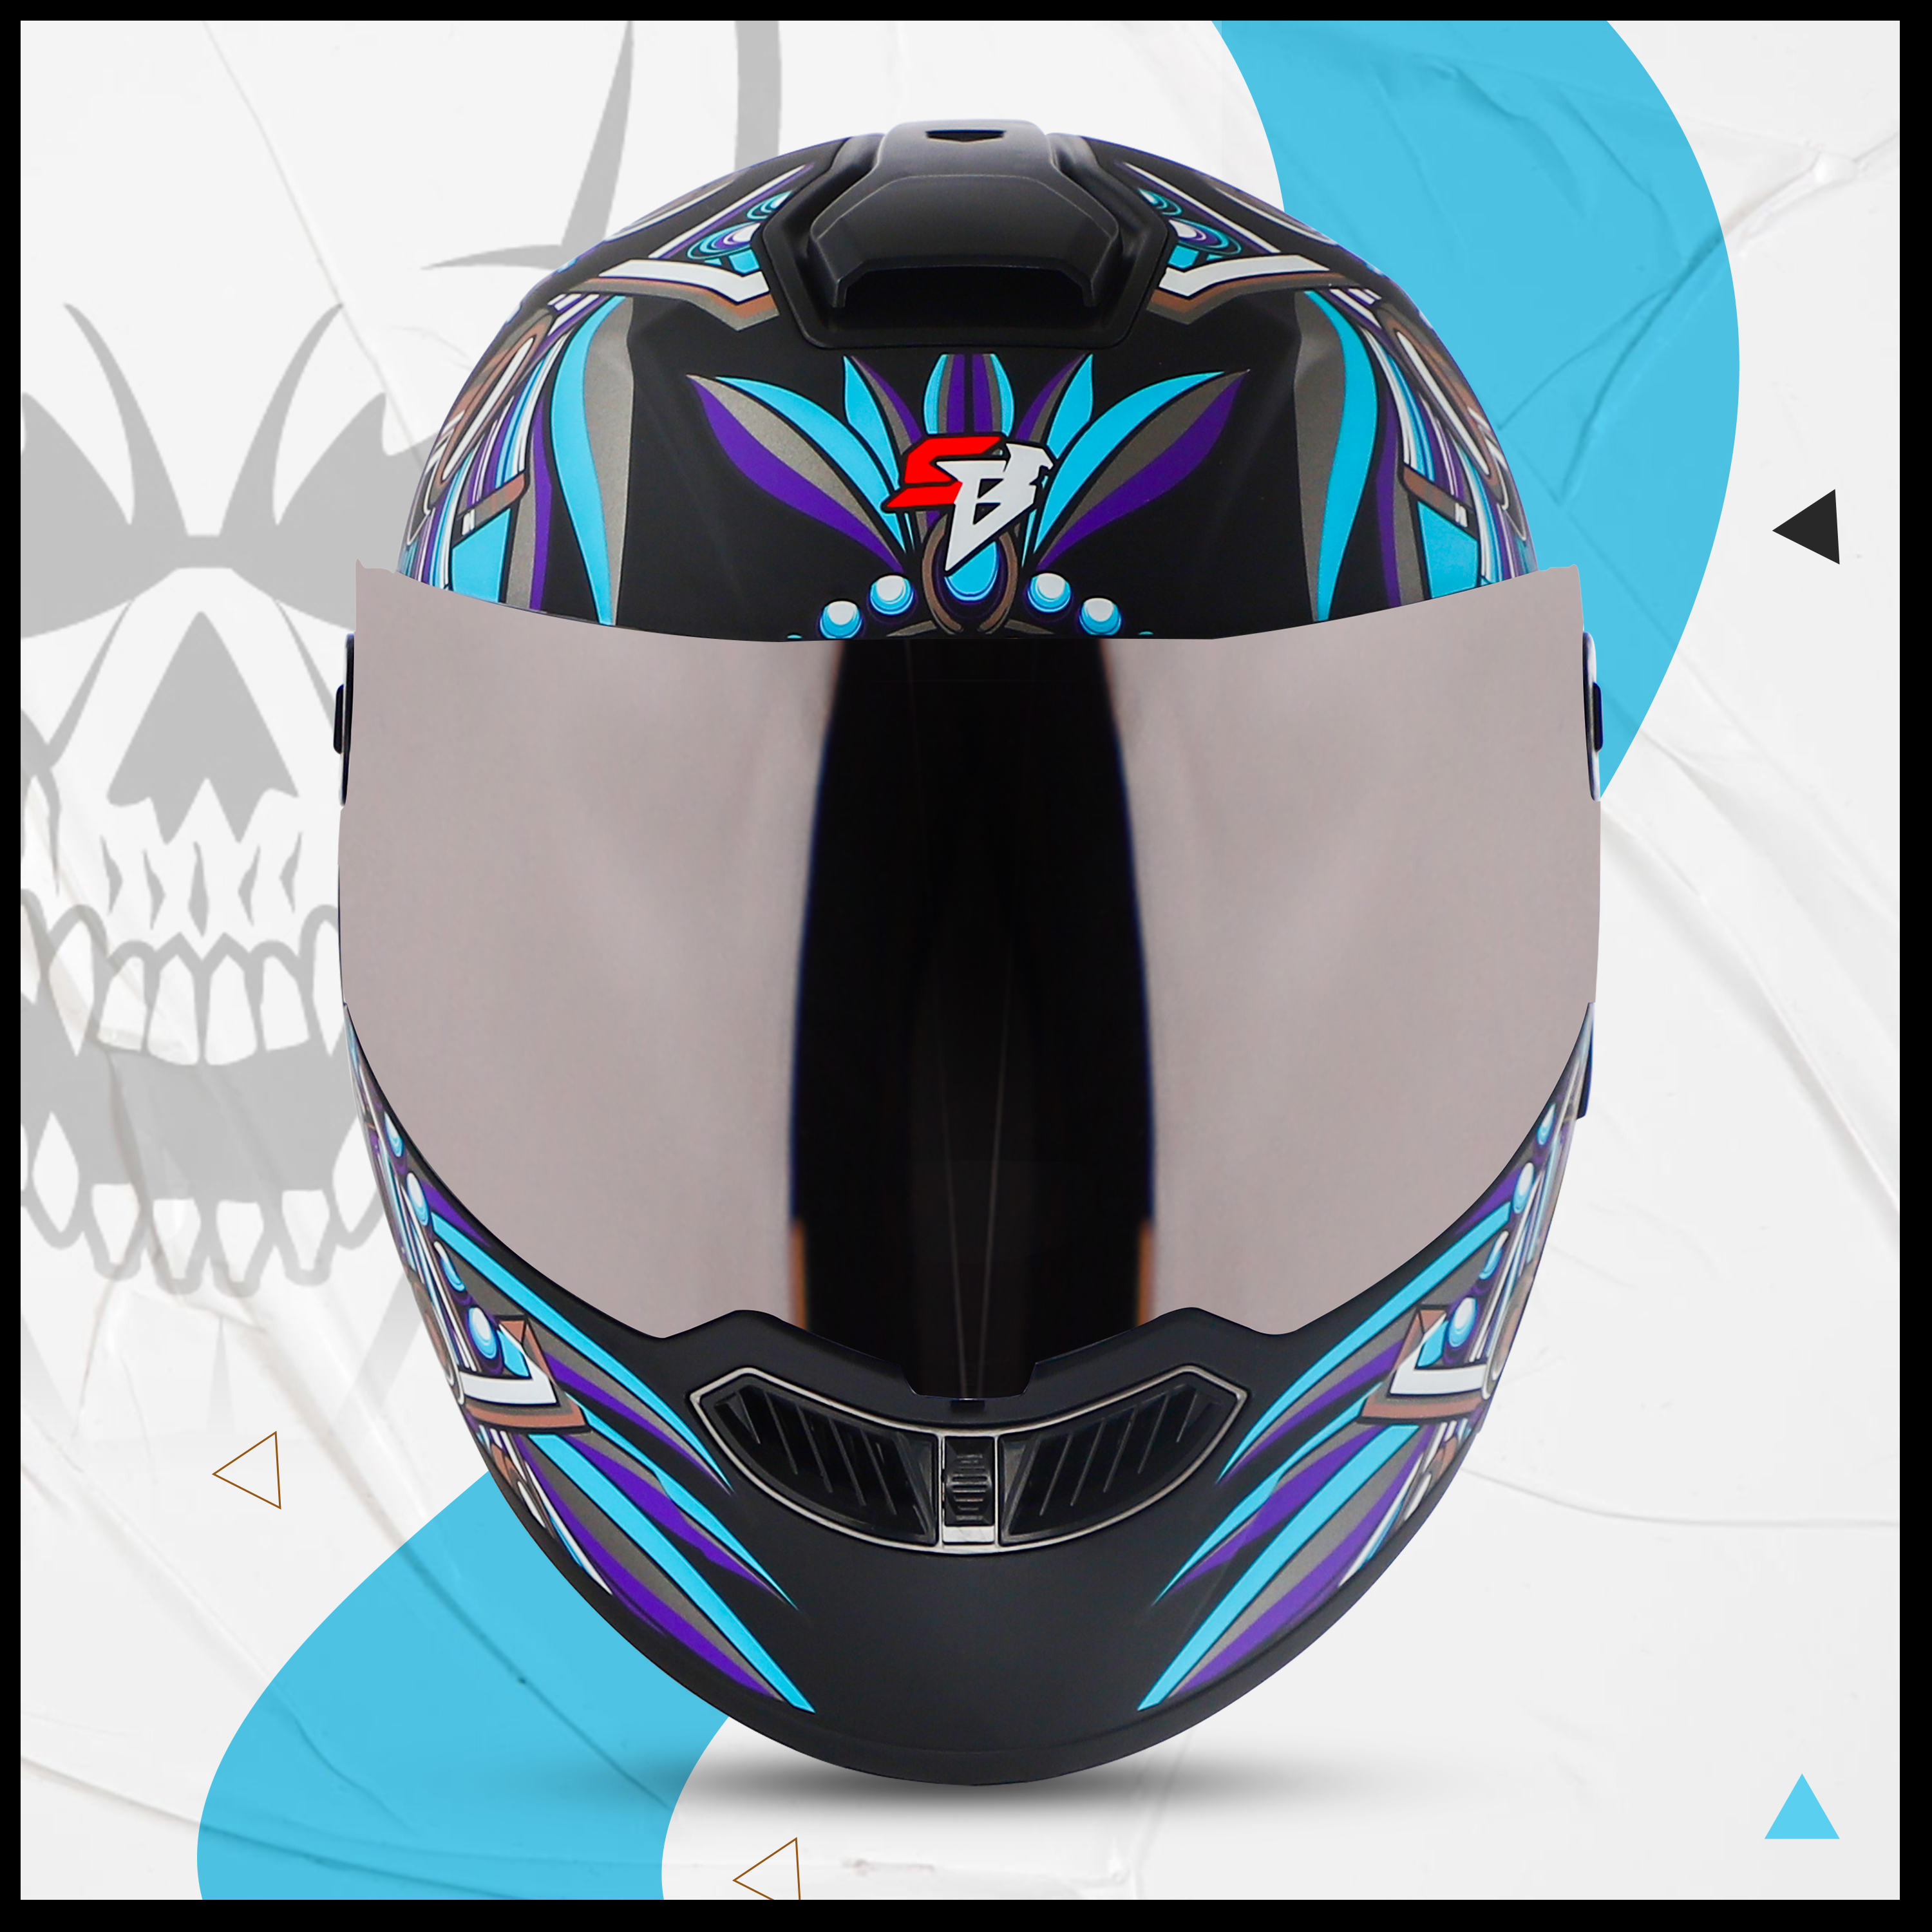 Steelbird SBA-8 Hunt ISI Certified Flip-Up Graphic Helmet For Men And Women (Glossy Black Jazz Blue With Silver Spoiler And Chrome Silver Visor)